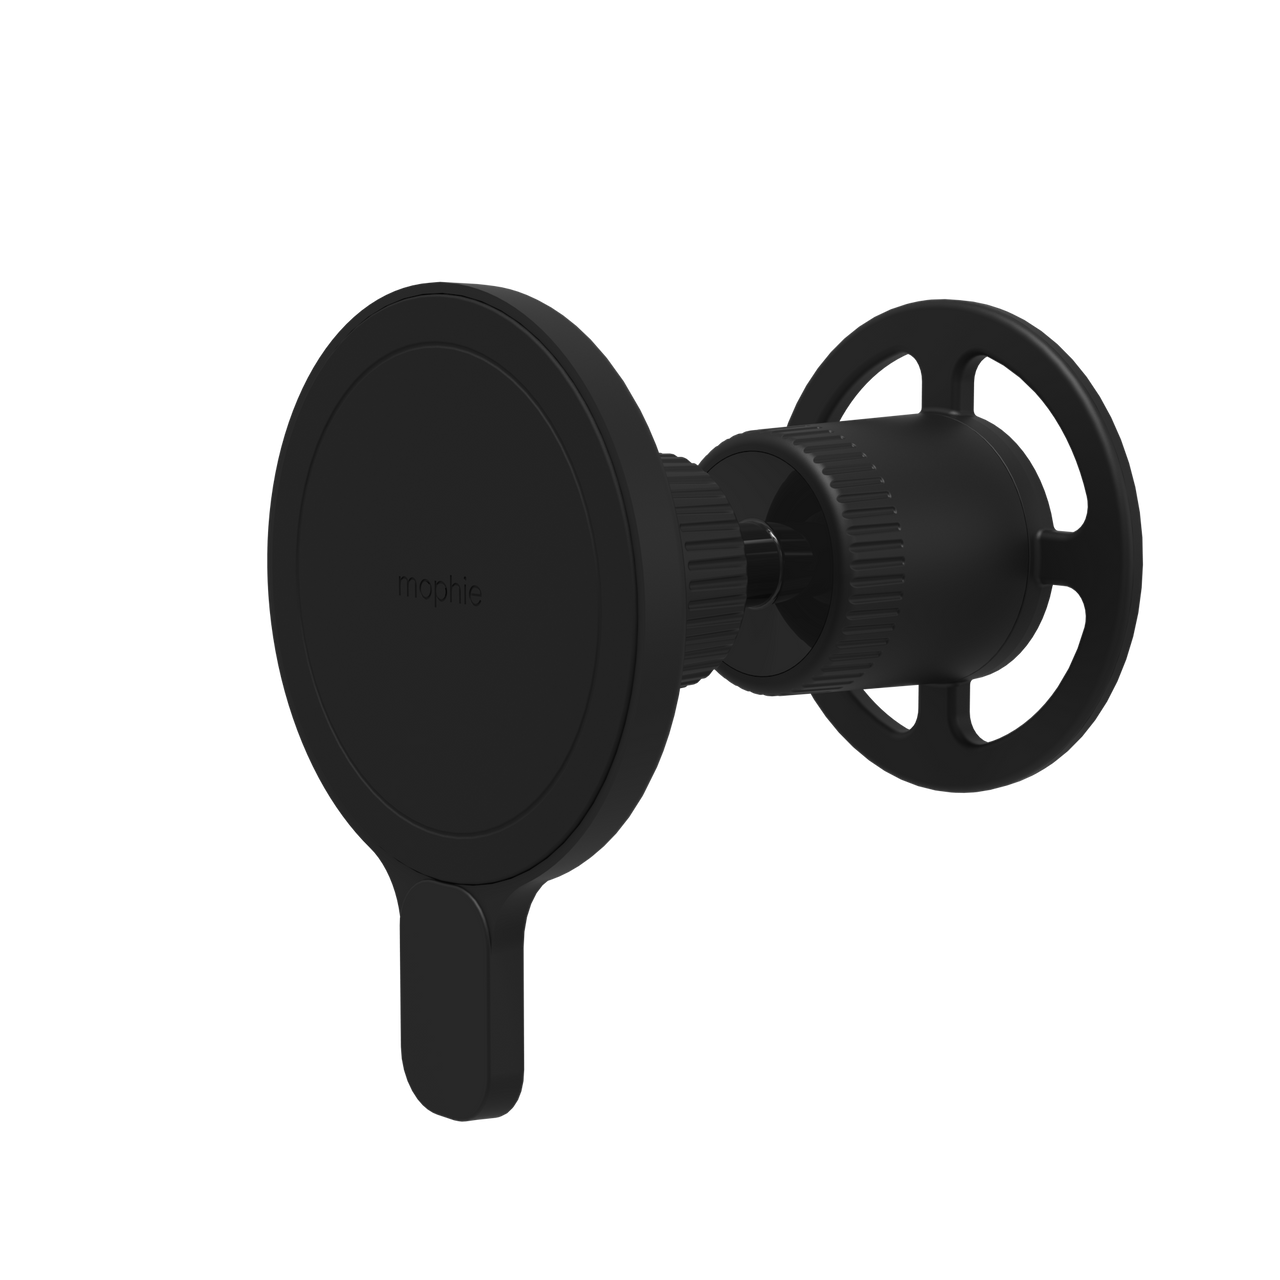 Magnetic Car Mount with Adjustable Arm for iPhones - ZAGG